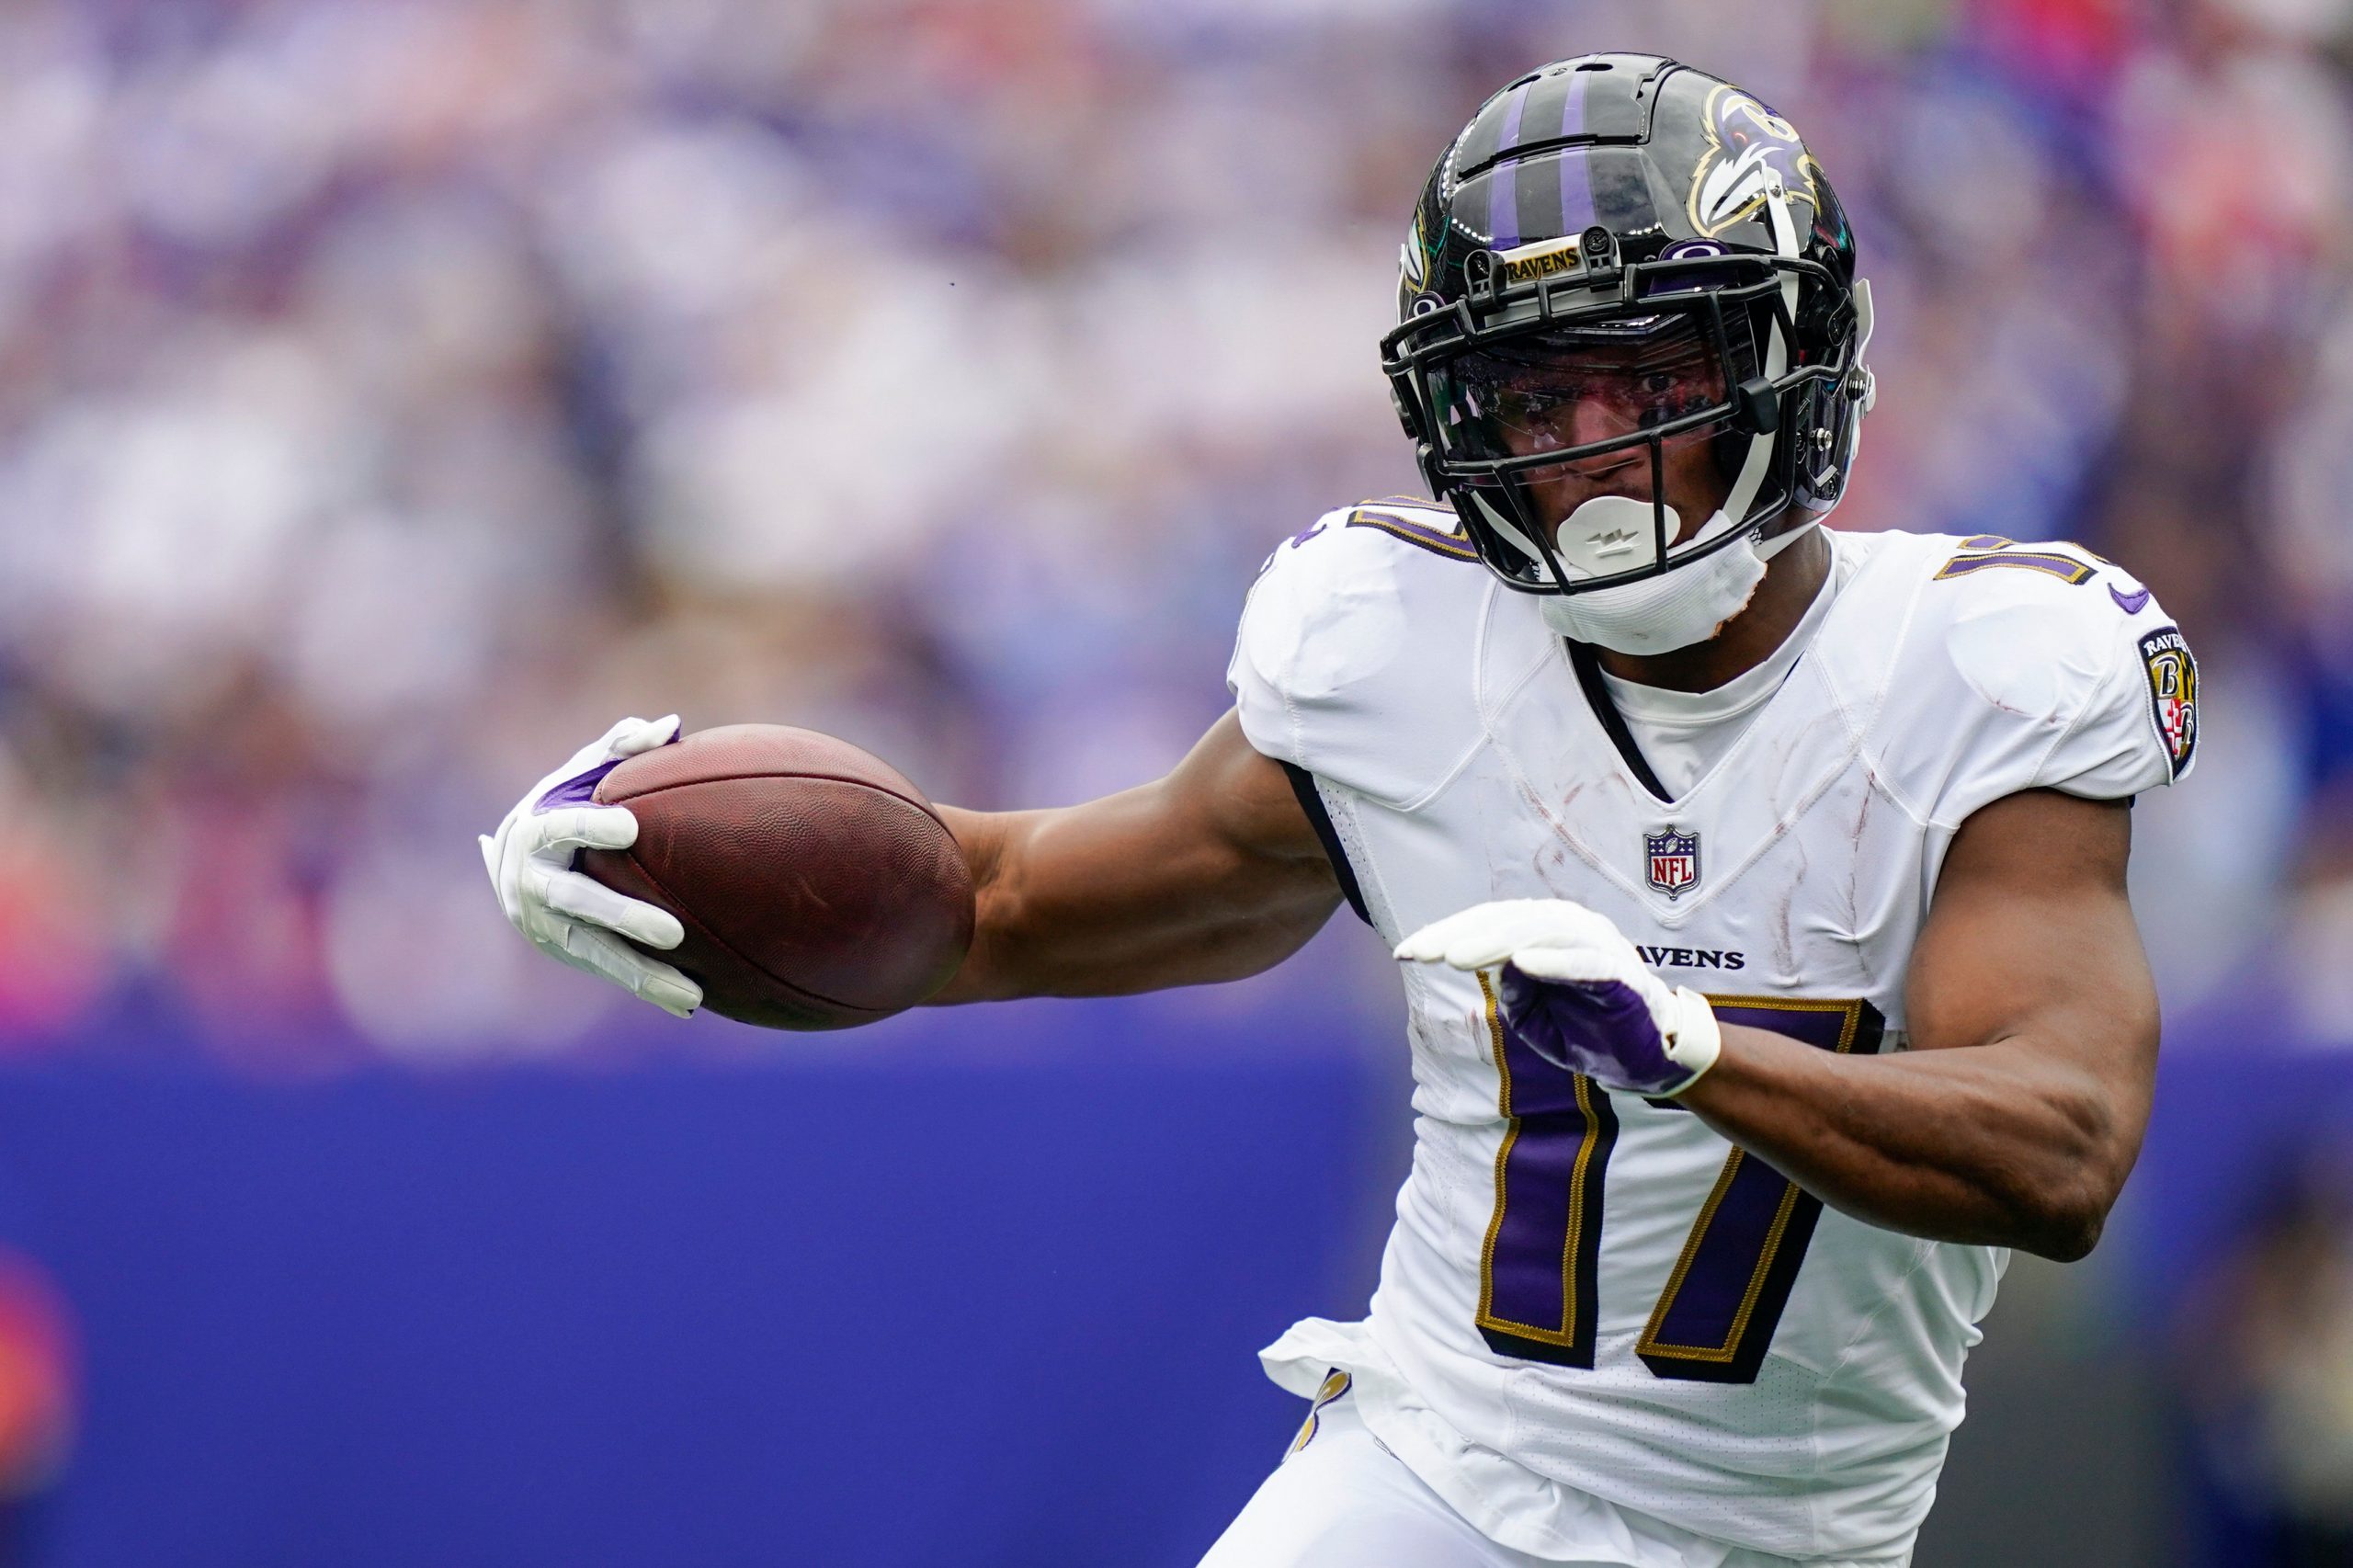 NFL Fantasy Football 2022: Week 7 waiver wire targets